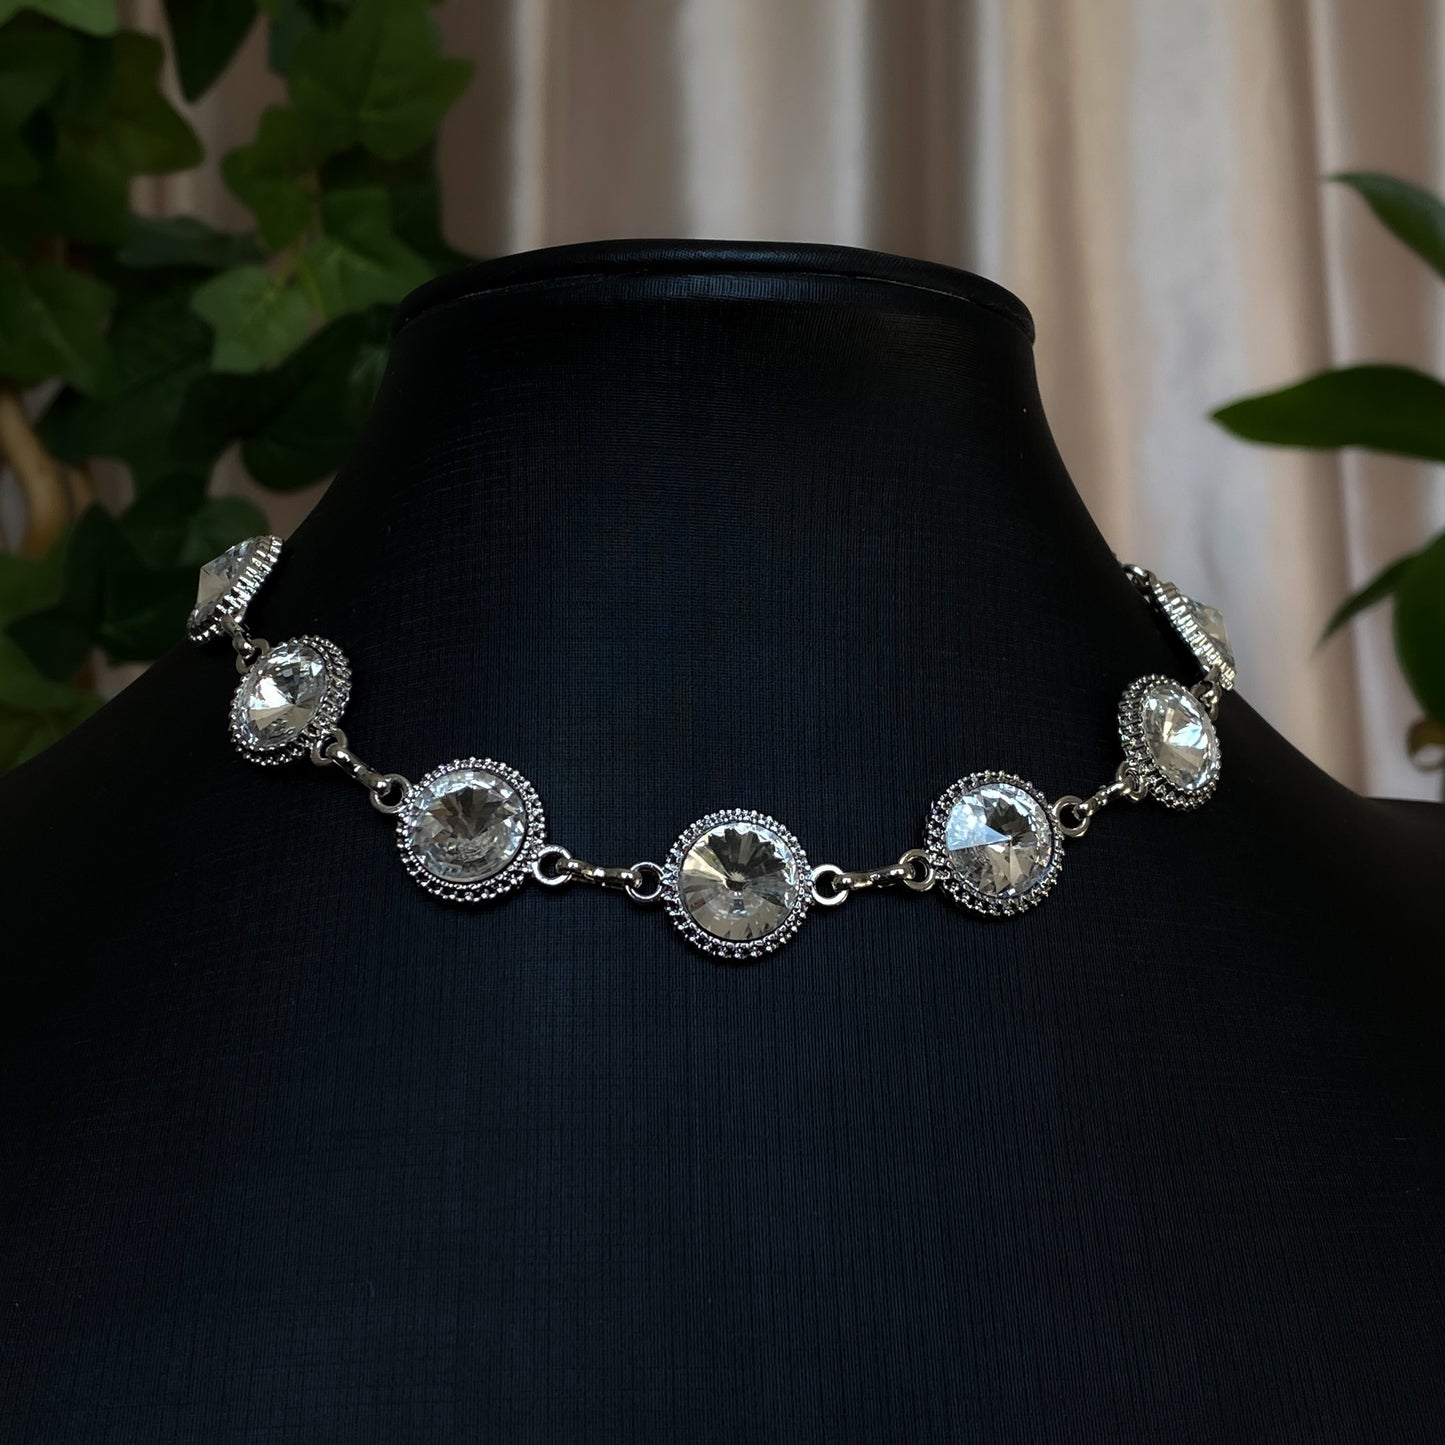 Tara ~ Dark Siren Glass Choker with Faceted Glass, Antique Silver Shells and Stainless Steel